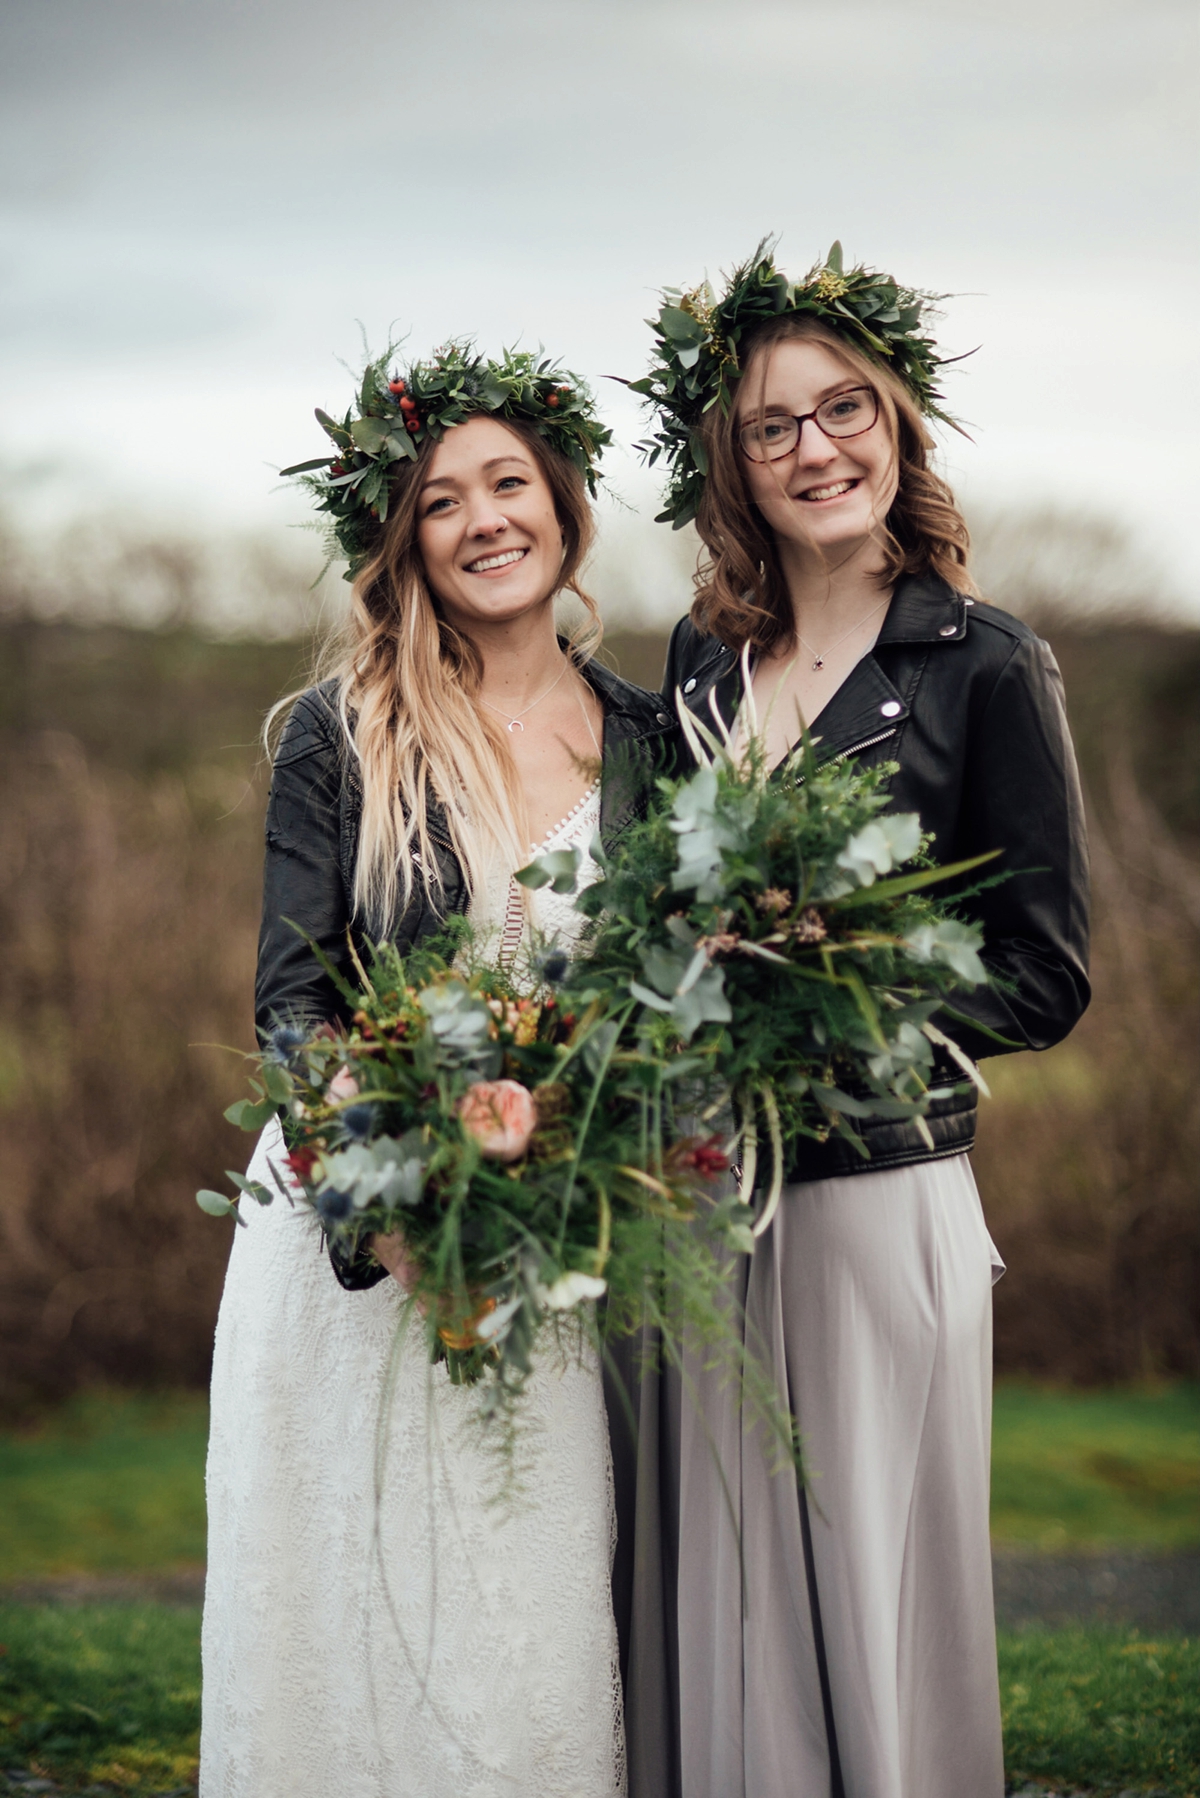 43 A Rembo Styling gown and leather jacket for a winter barn wedding in Cornwall